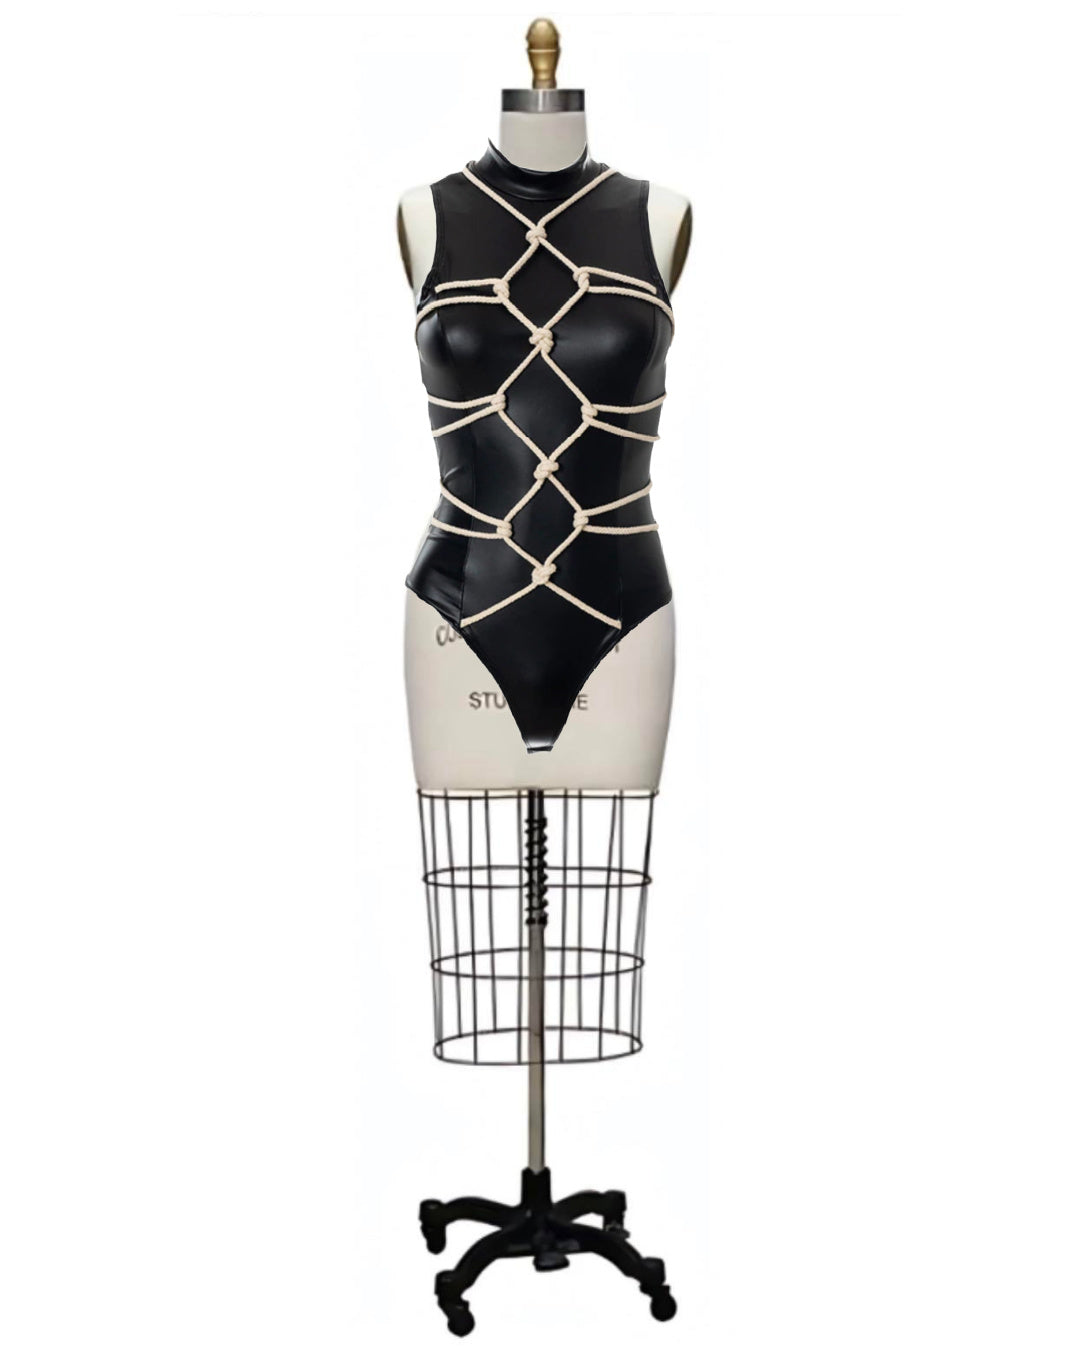 Ropes- the Rope Wrapped Black Bodysuit – Dorothea's Closet Vintage